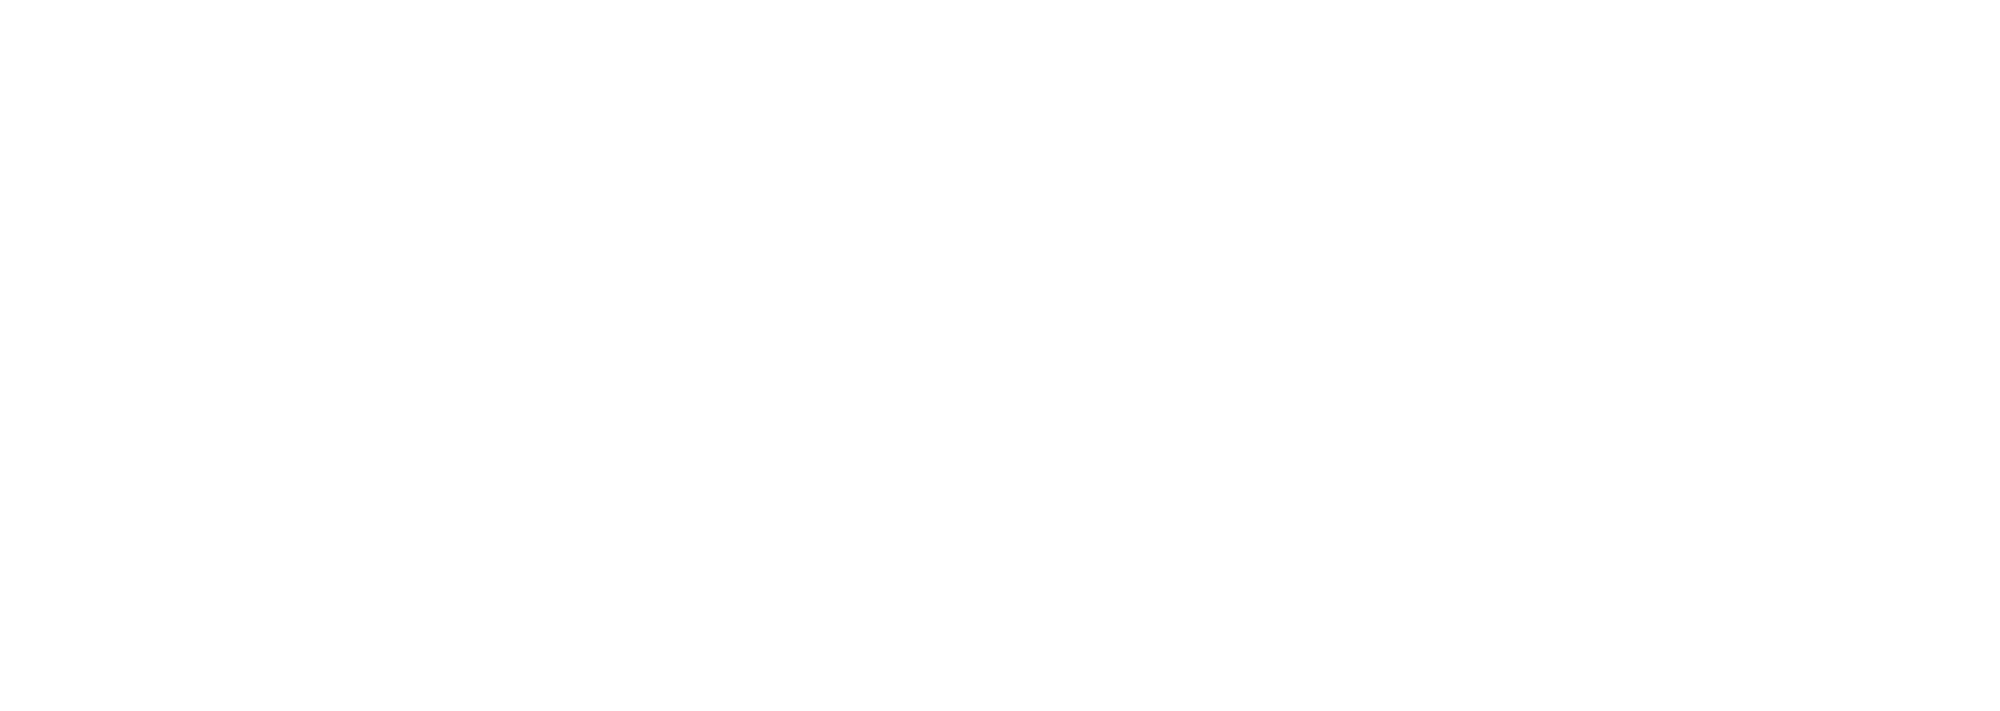 CONTACT-logo-white.png